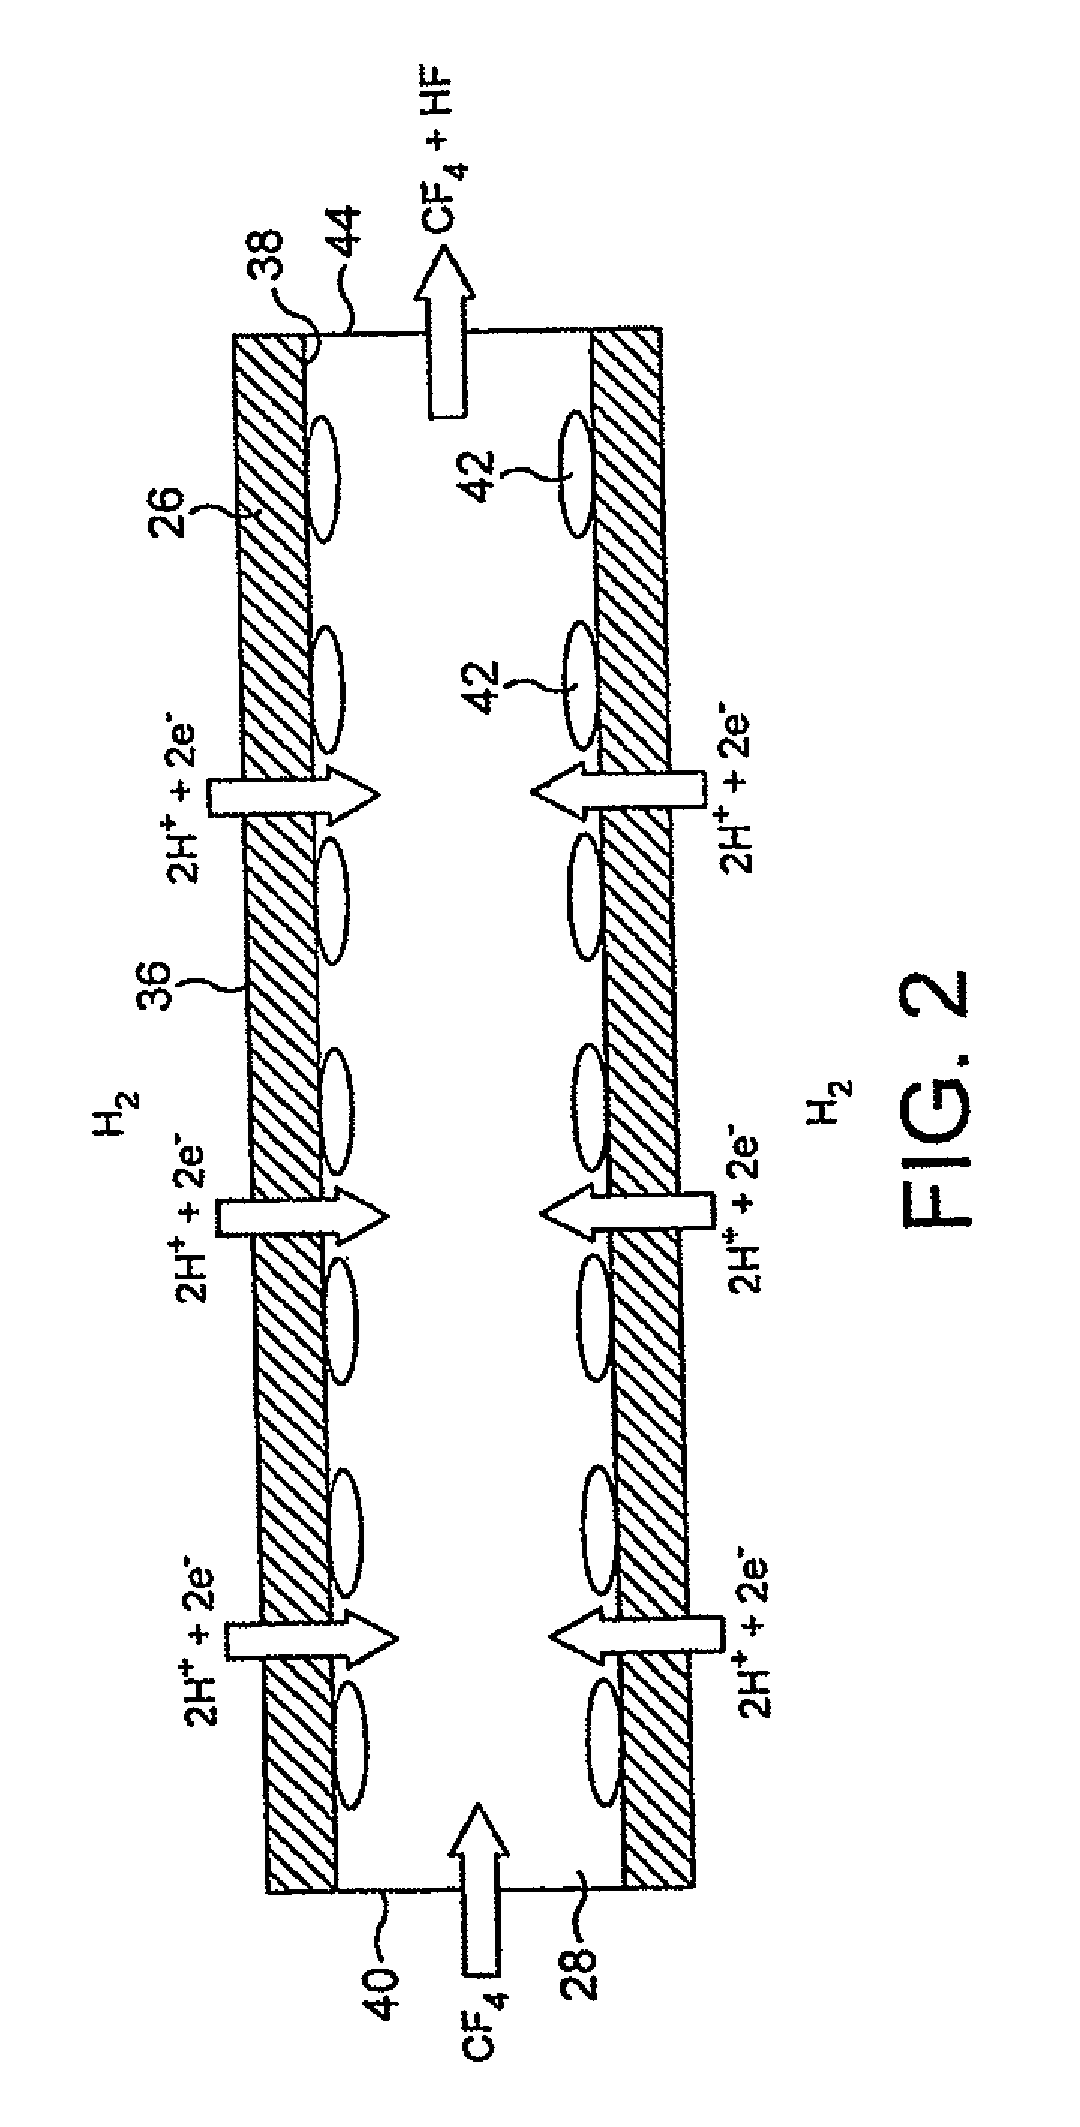 Apparatus for treating a gas stream